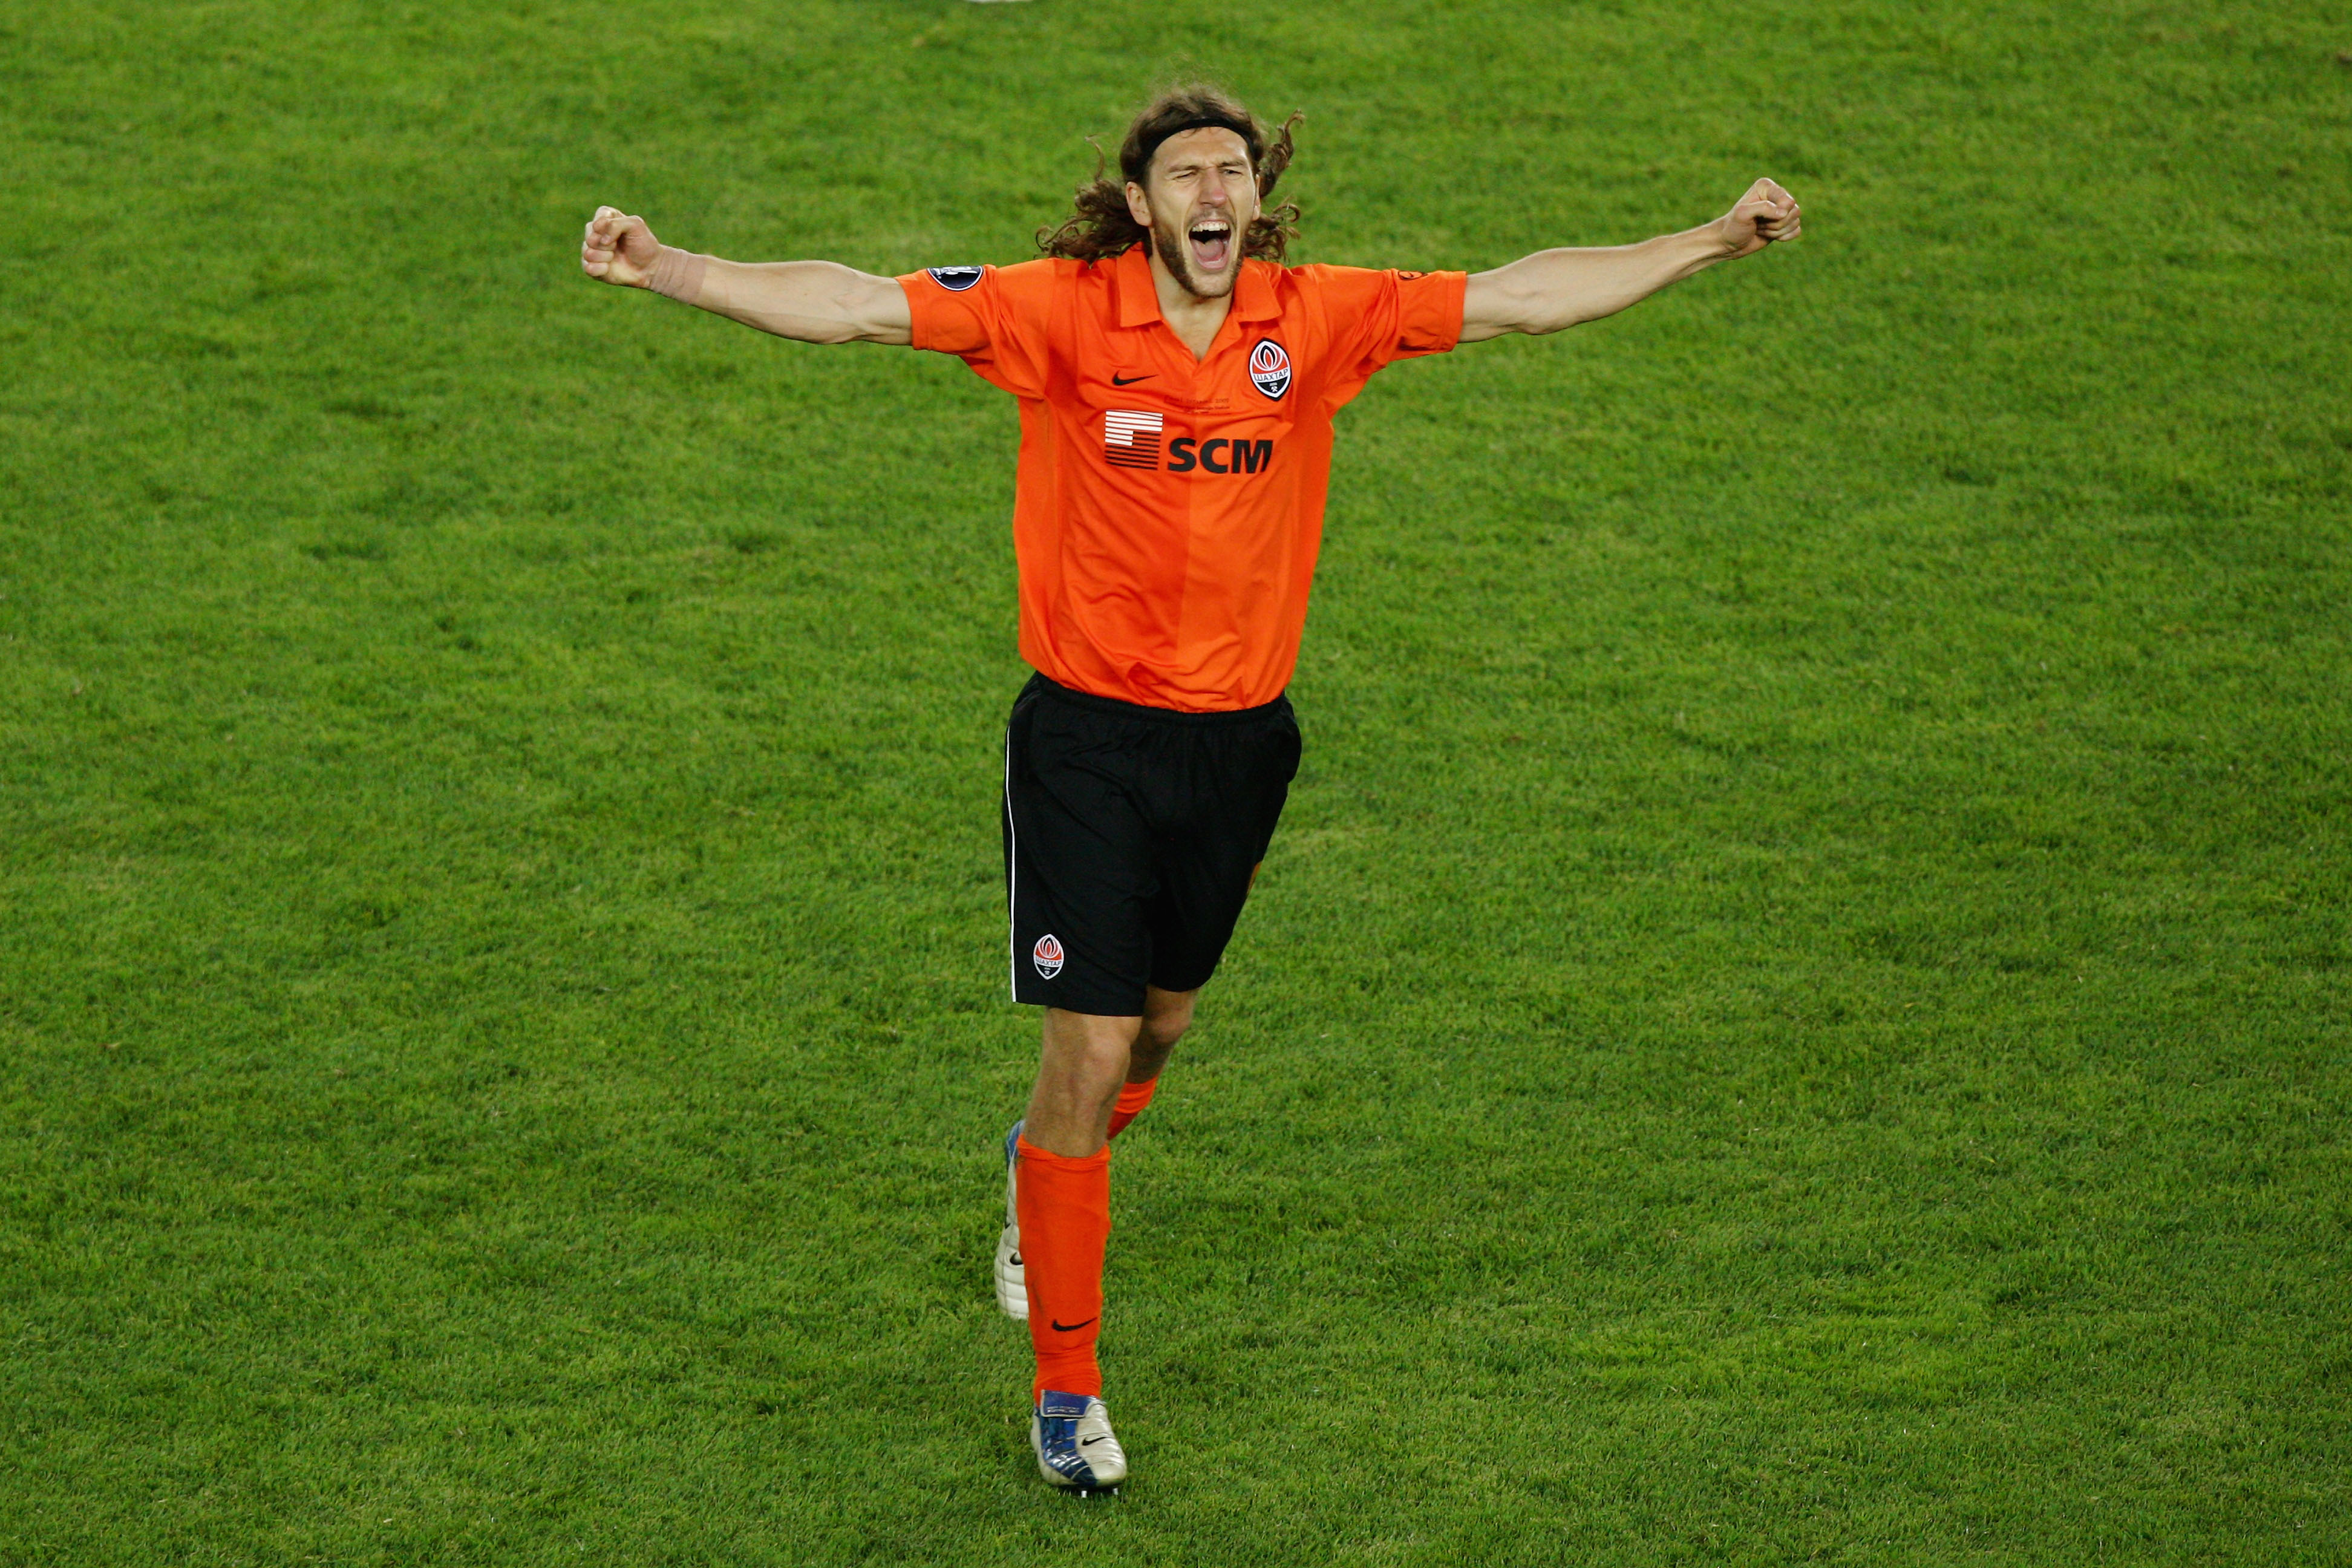 ISTANBUL, TURKEY - MAY 20:  Dmytro Chygrynskiy of Shakhtar Donetsk celebrates following his team's victory after extra time at the end of the UEFA Cup Final between Shakhtar Donetsk and Werder Bremen at the Sukru Saracoglu Stadium on May 20, 2009 in Istan